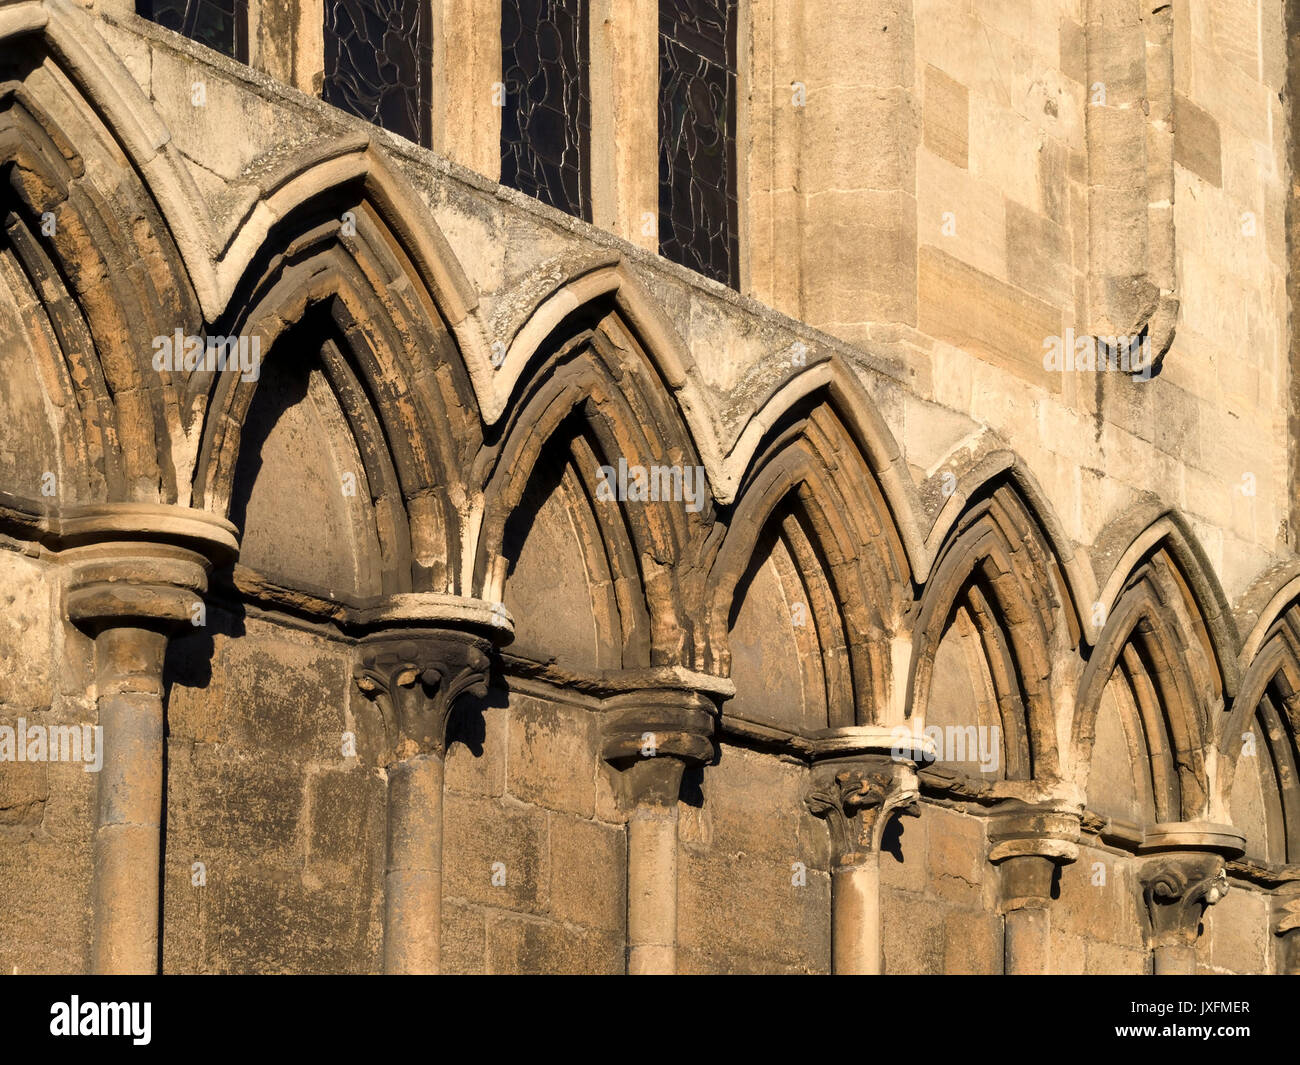 Row of old, stone pointed Gothic arches decorating exterior wall of All Saints Church, Stamford, England, UK Stock Photo